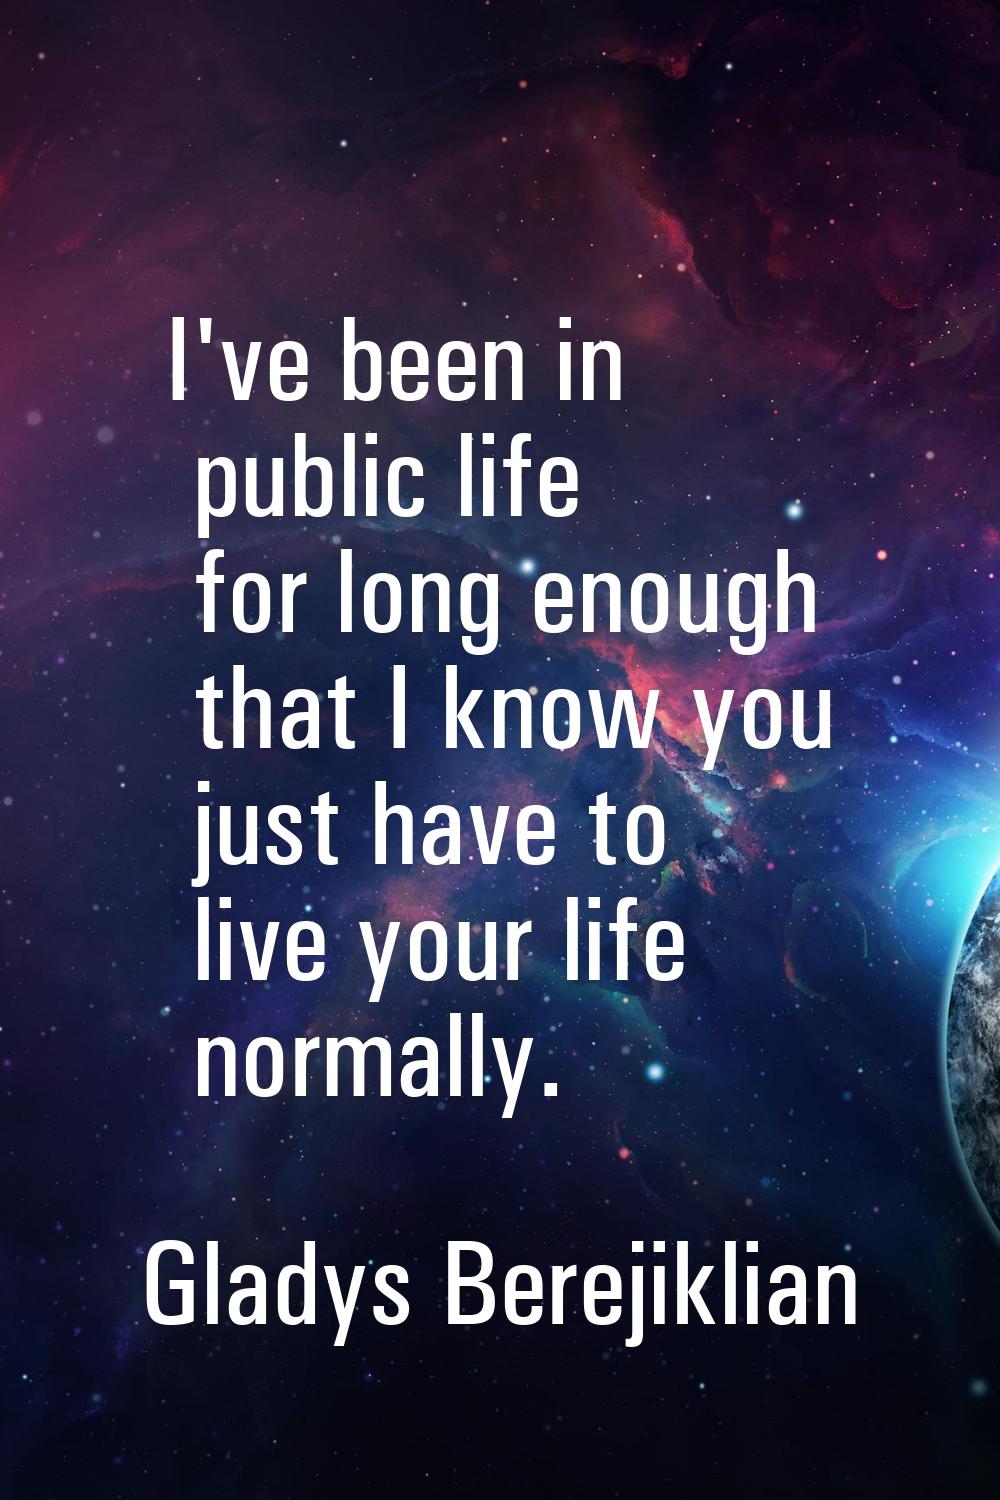 I've been in public life for long enough that I know you just have to live your life normally.